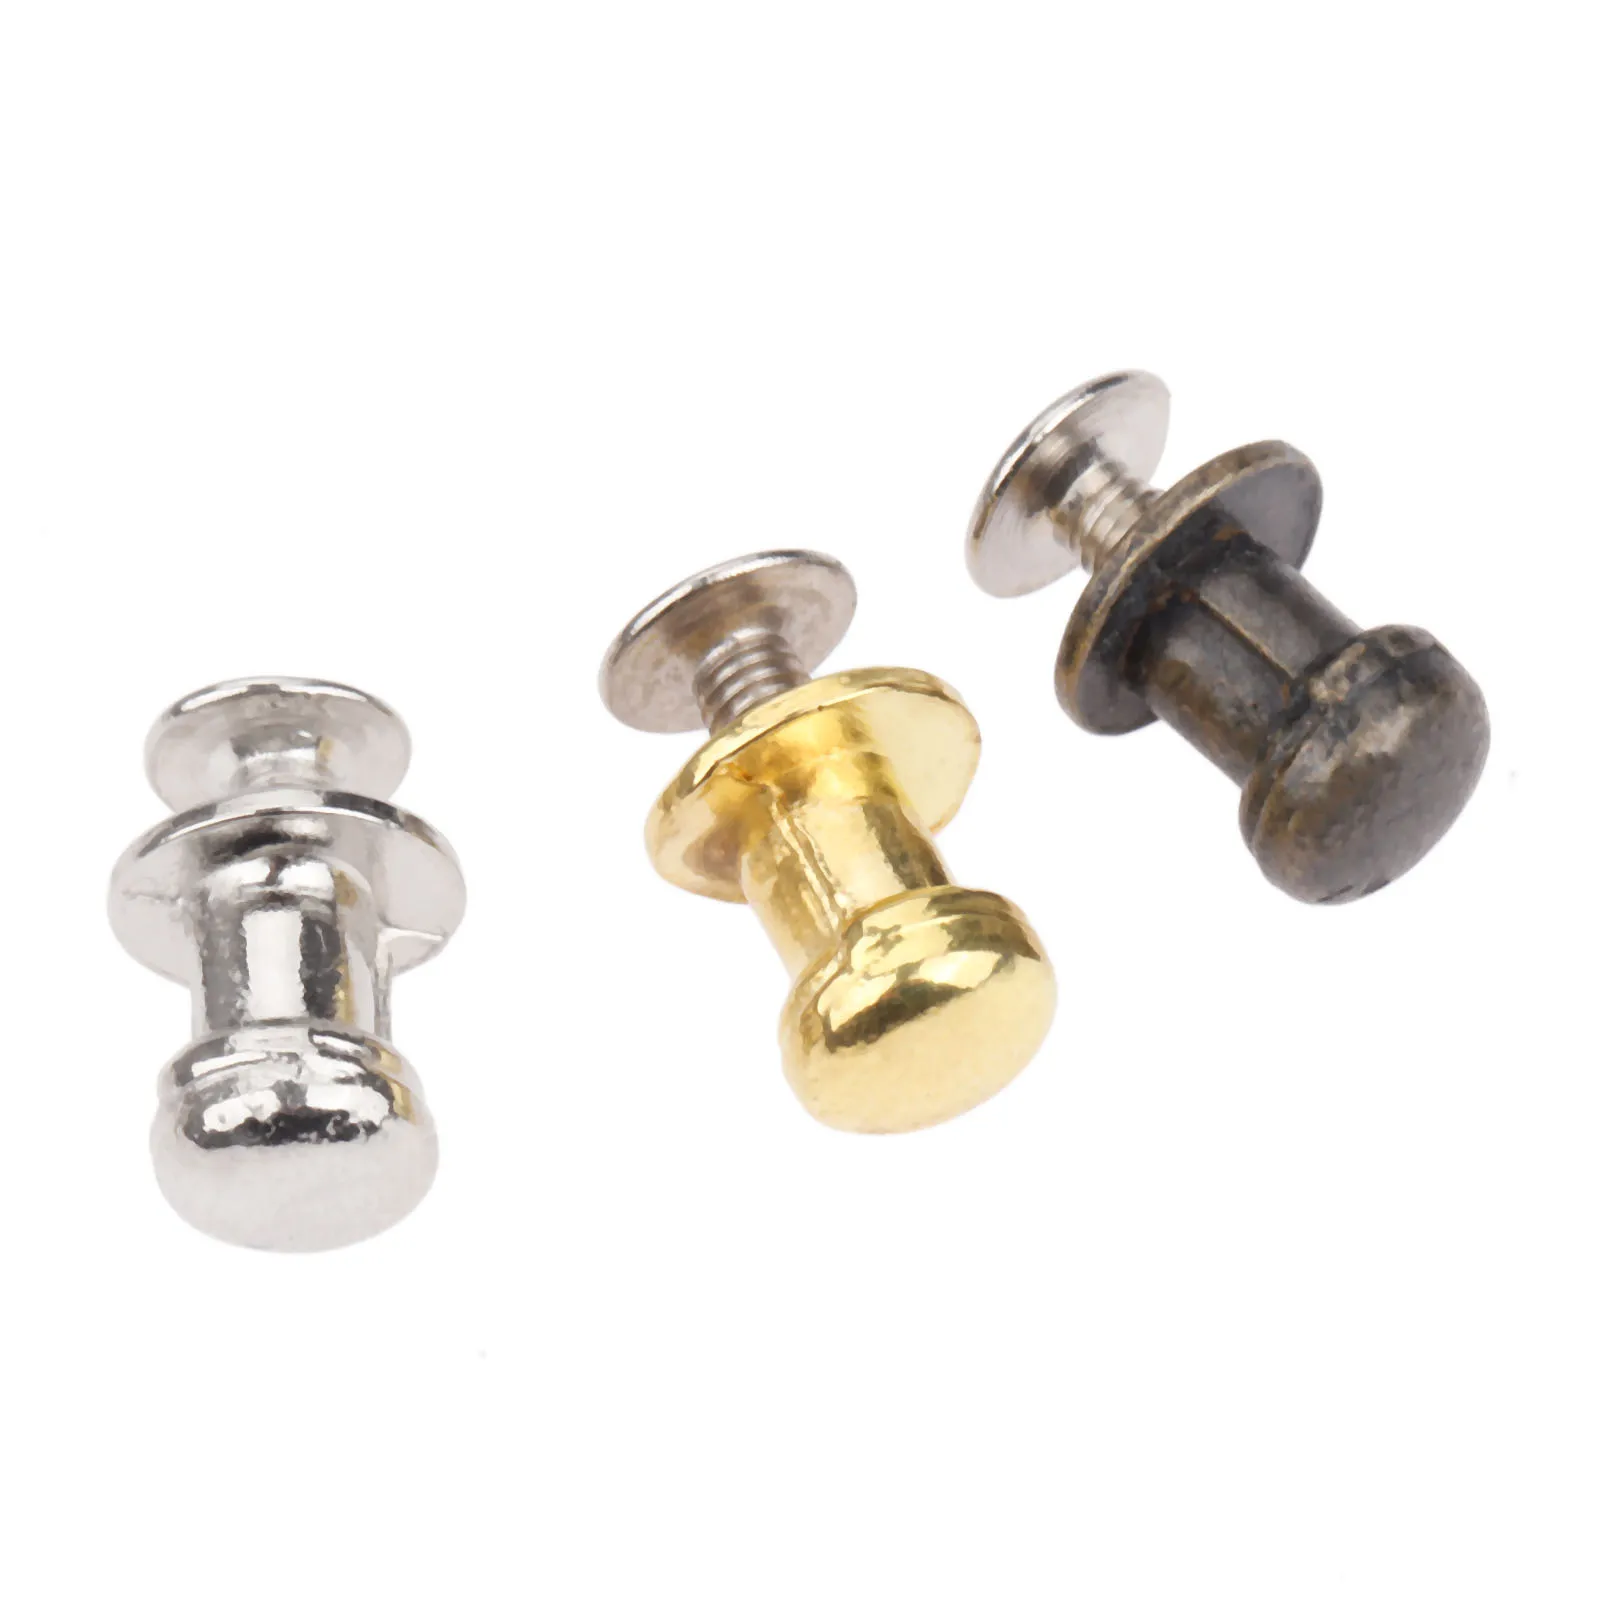 10pcs/lot Mini Knob Small Button Handle 7mm*10mm Pull Antique Bronze/Silver/Gold Jewelry Wooden Box Drawer Cabinet w/screws images - 6